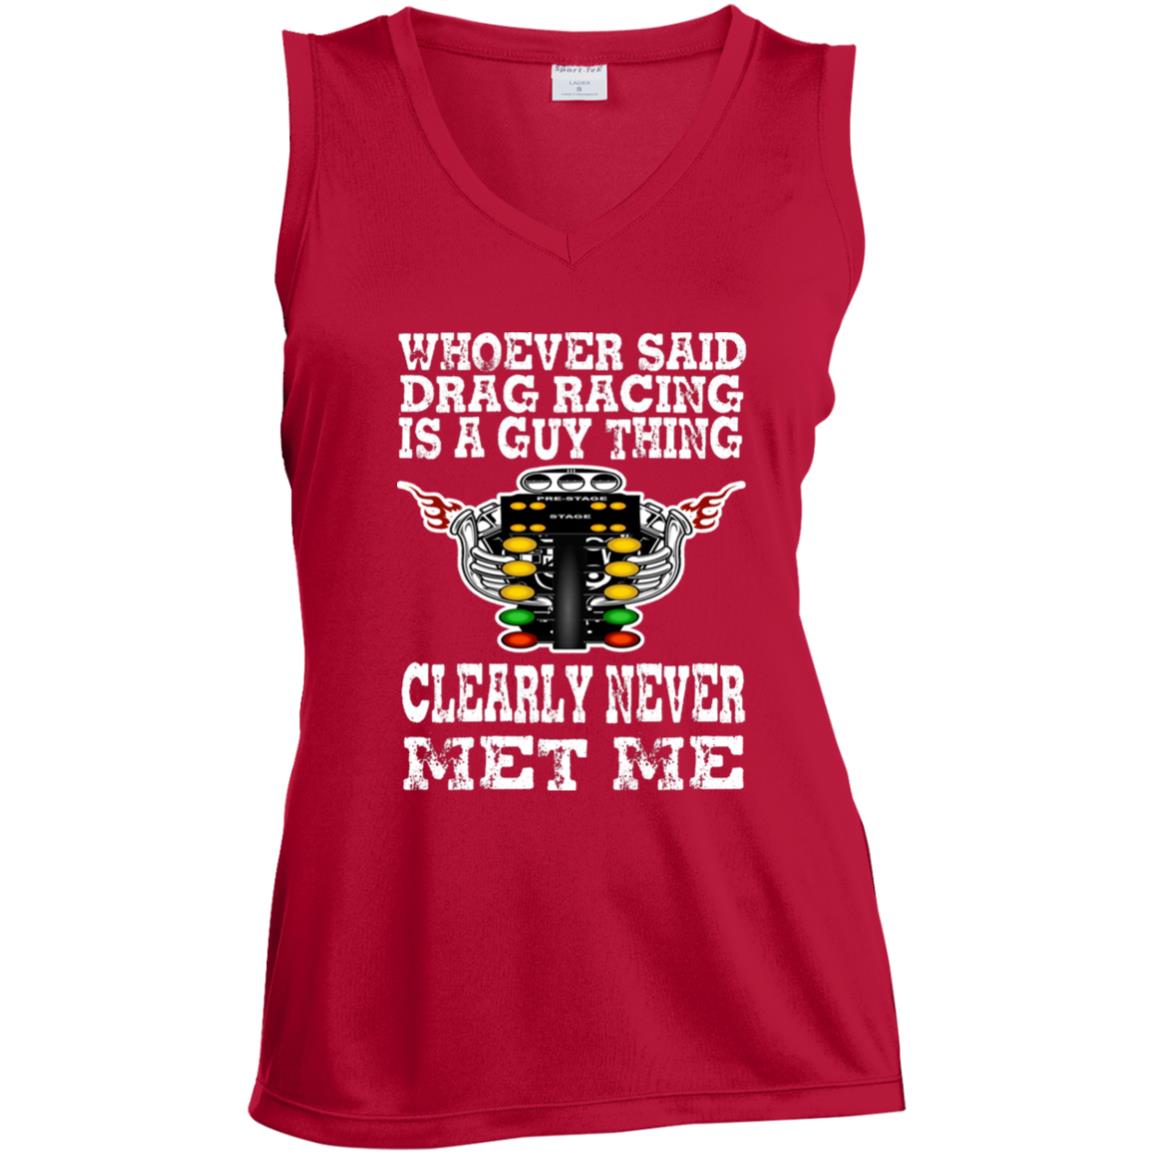 Whoever Said Drag Racing Is A Guy Thing Ladies' Sleeveless V-Neck Performance Tee